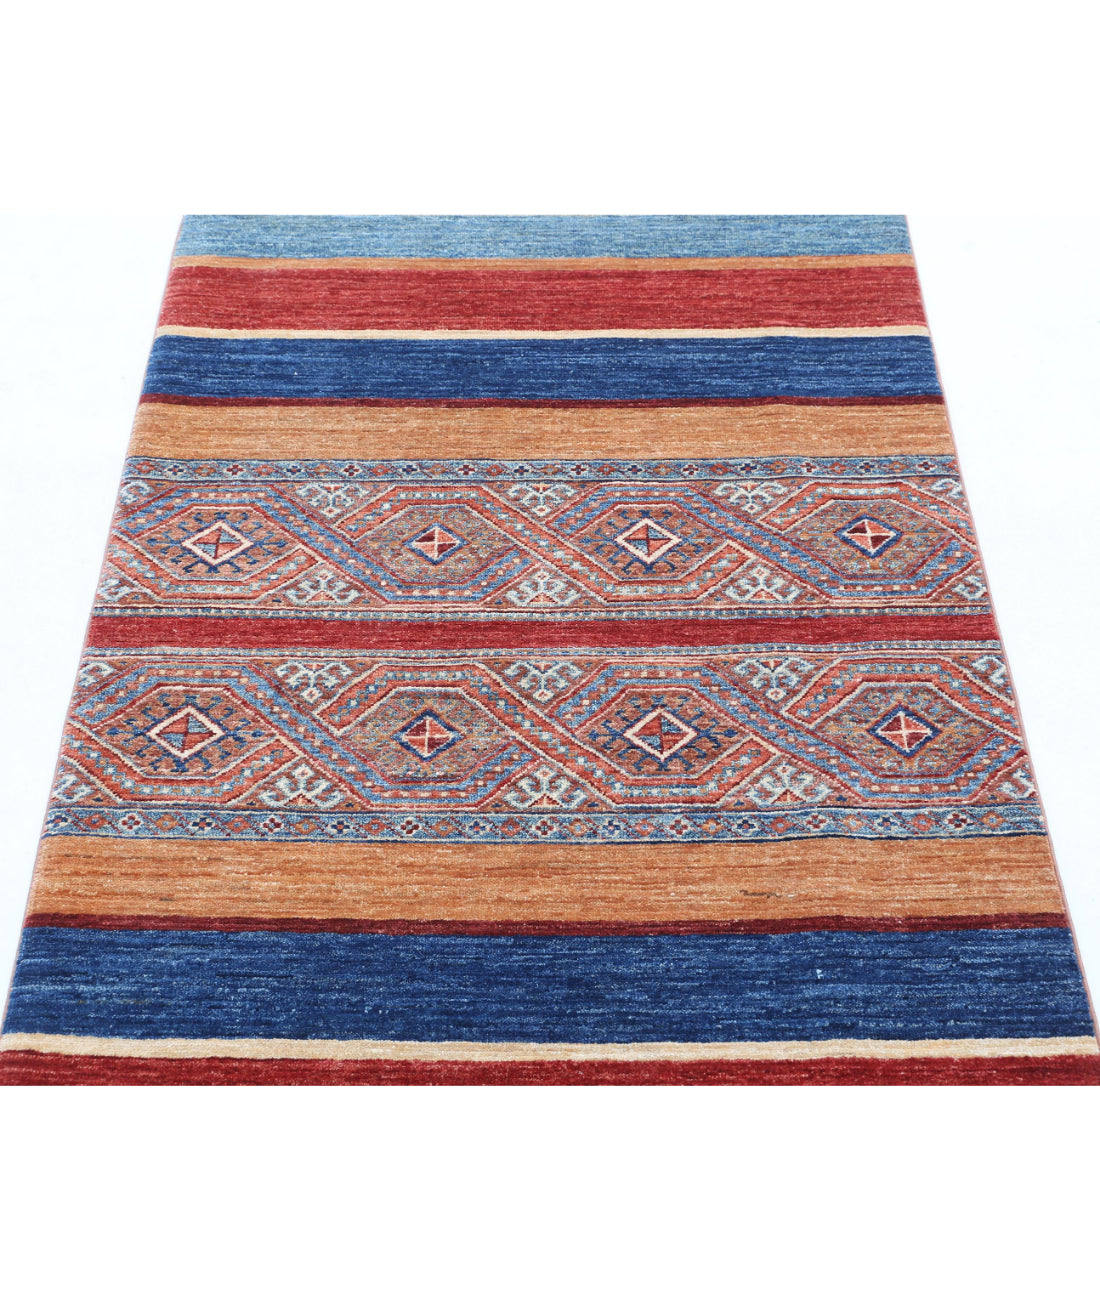 Hand Knotted Khurjeen Wool Rug - 3'0'' x 4'10'' 3'0'' x 4'10'' (90 X 145) / Multi / Multi